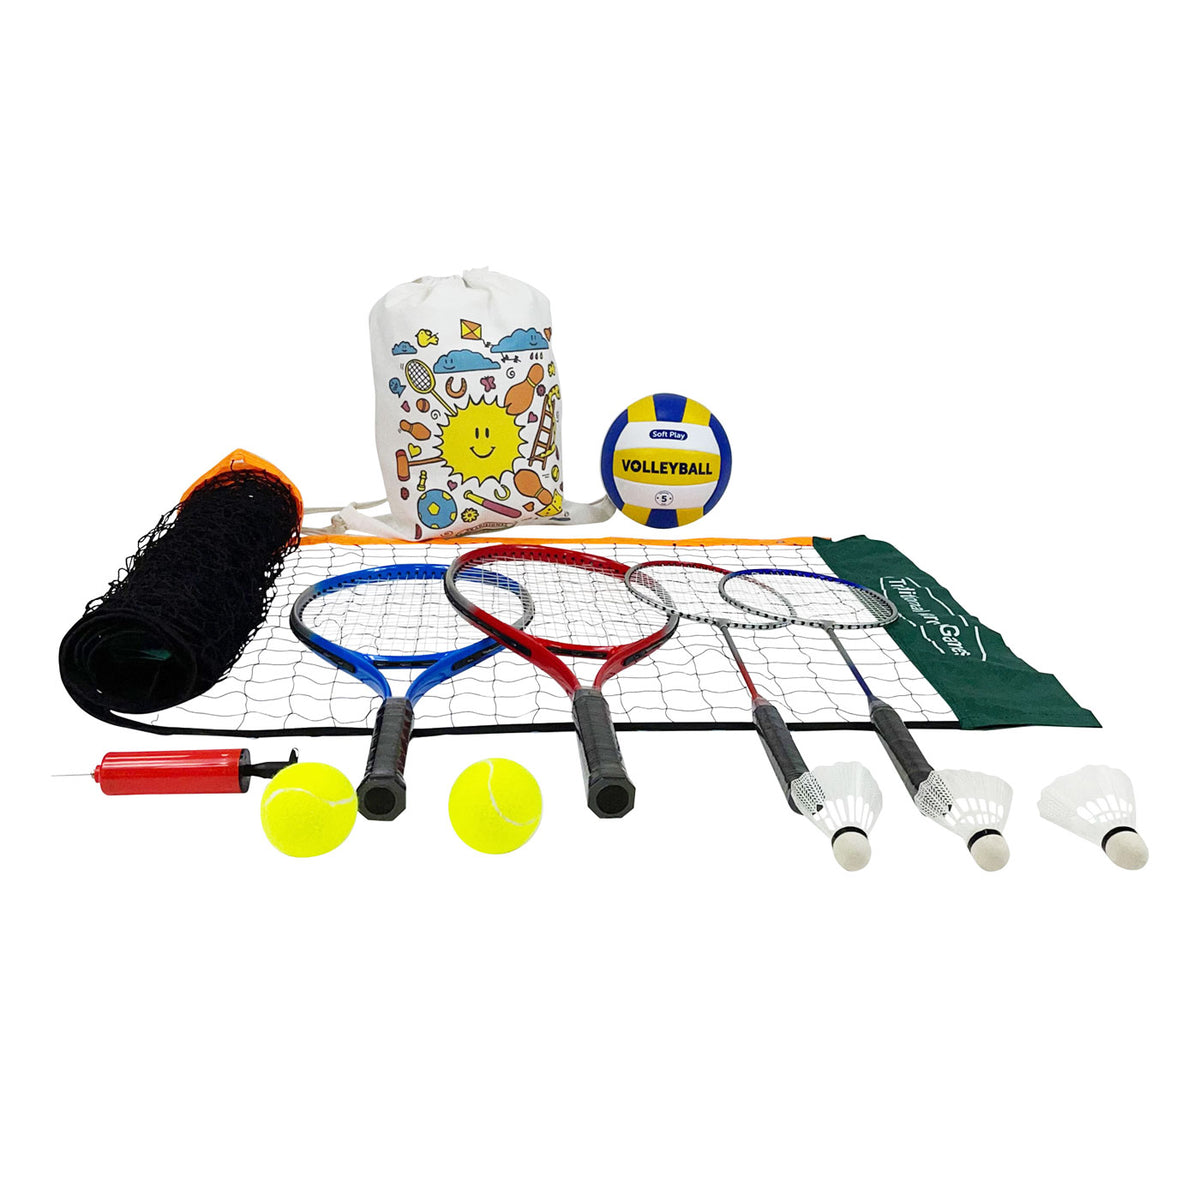 3 in 1 Volleyball and Tennis Set with 6m Net